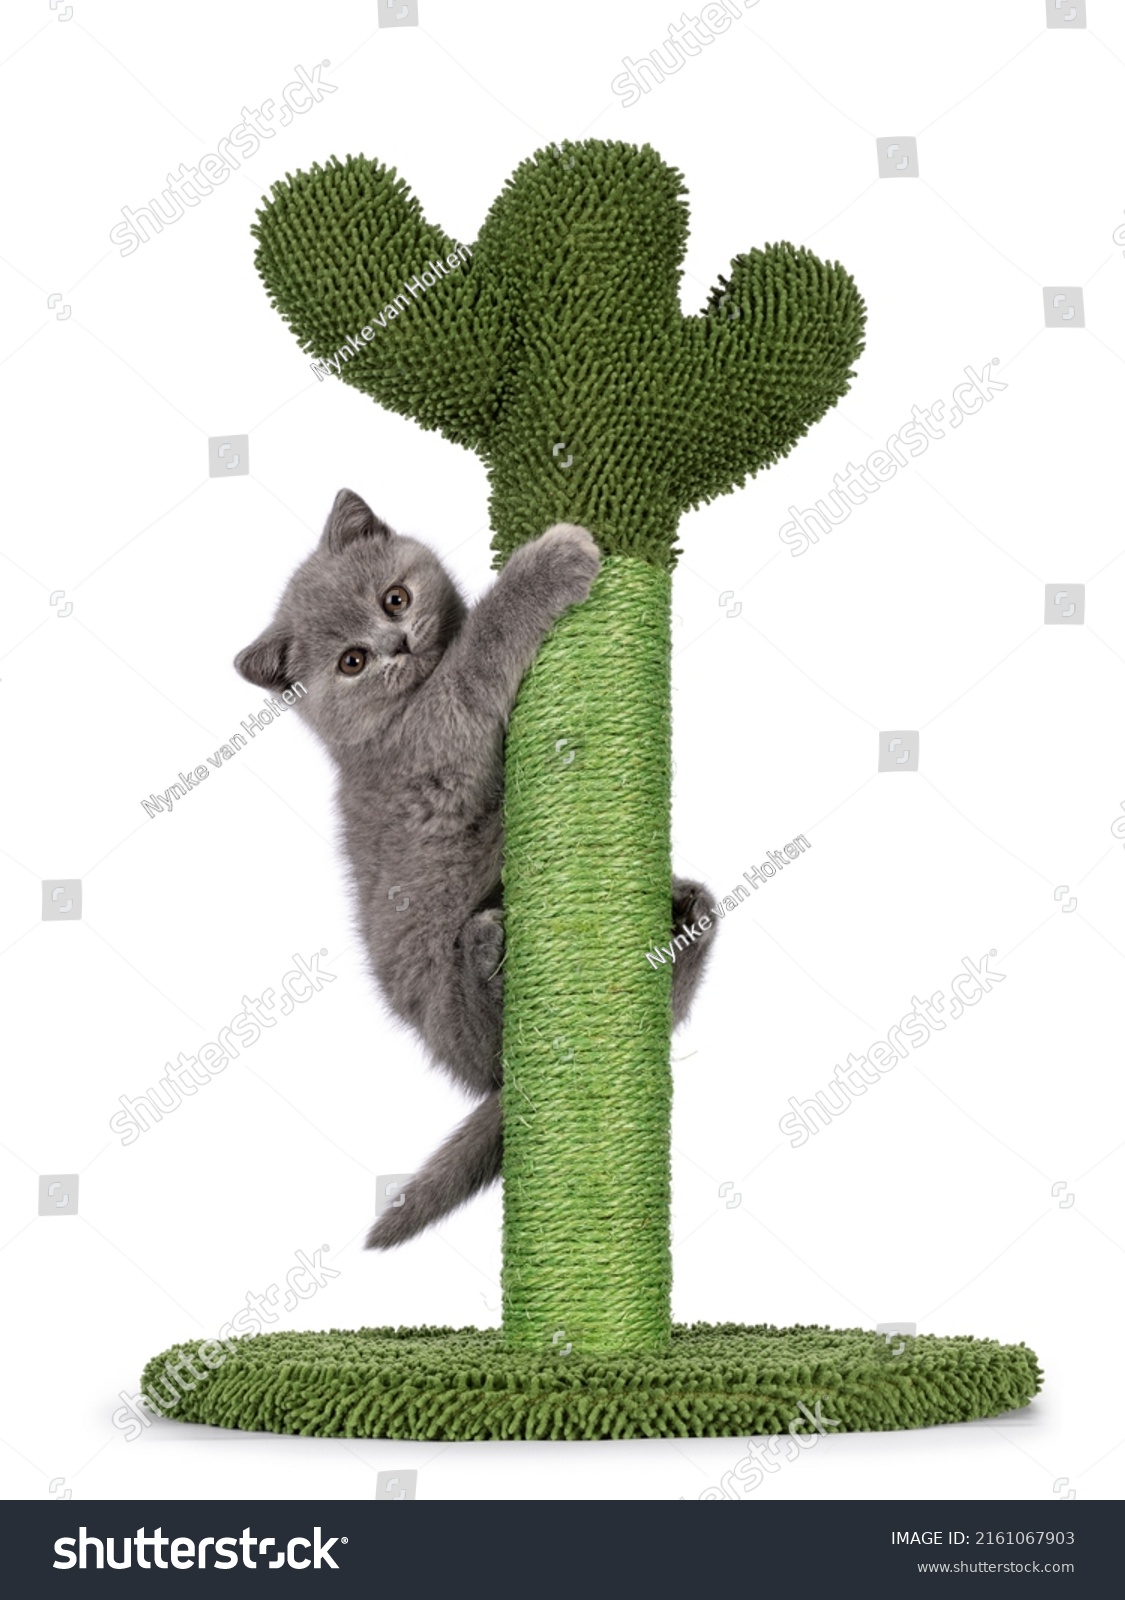 Cute little blue tortie British Shorthair cat kitten with adorable colored toes, climbing in green cactus shaped scratching pole. Looking straight to camera. Isolated on a white background. #2161067903